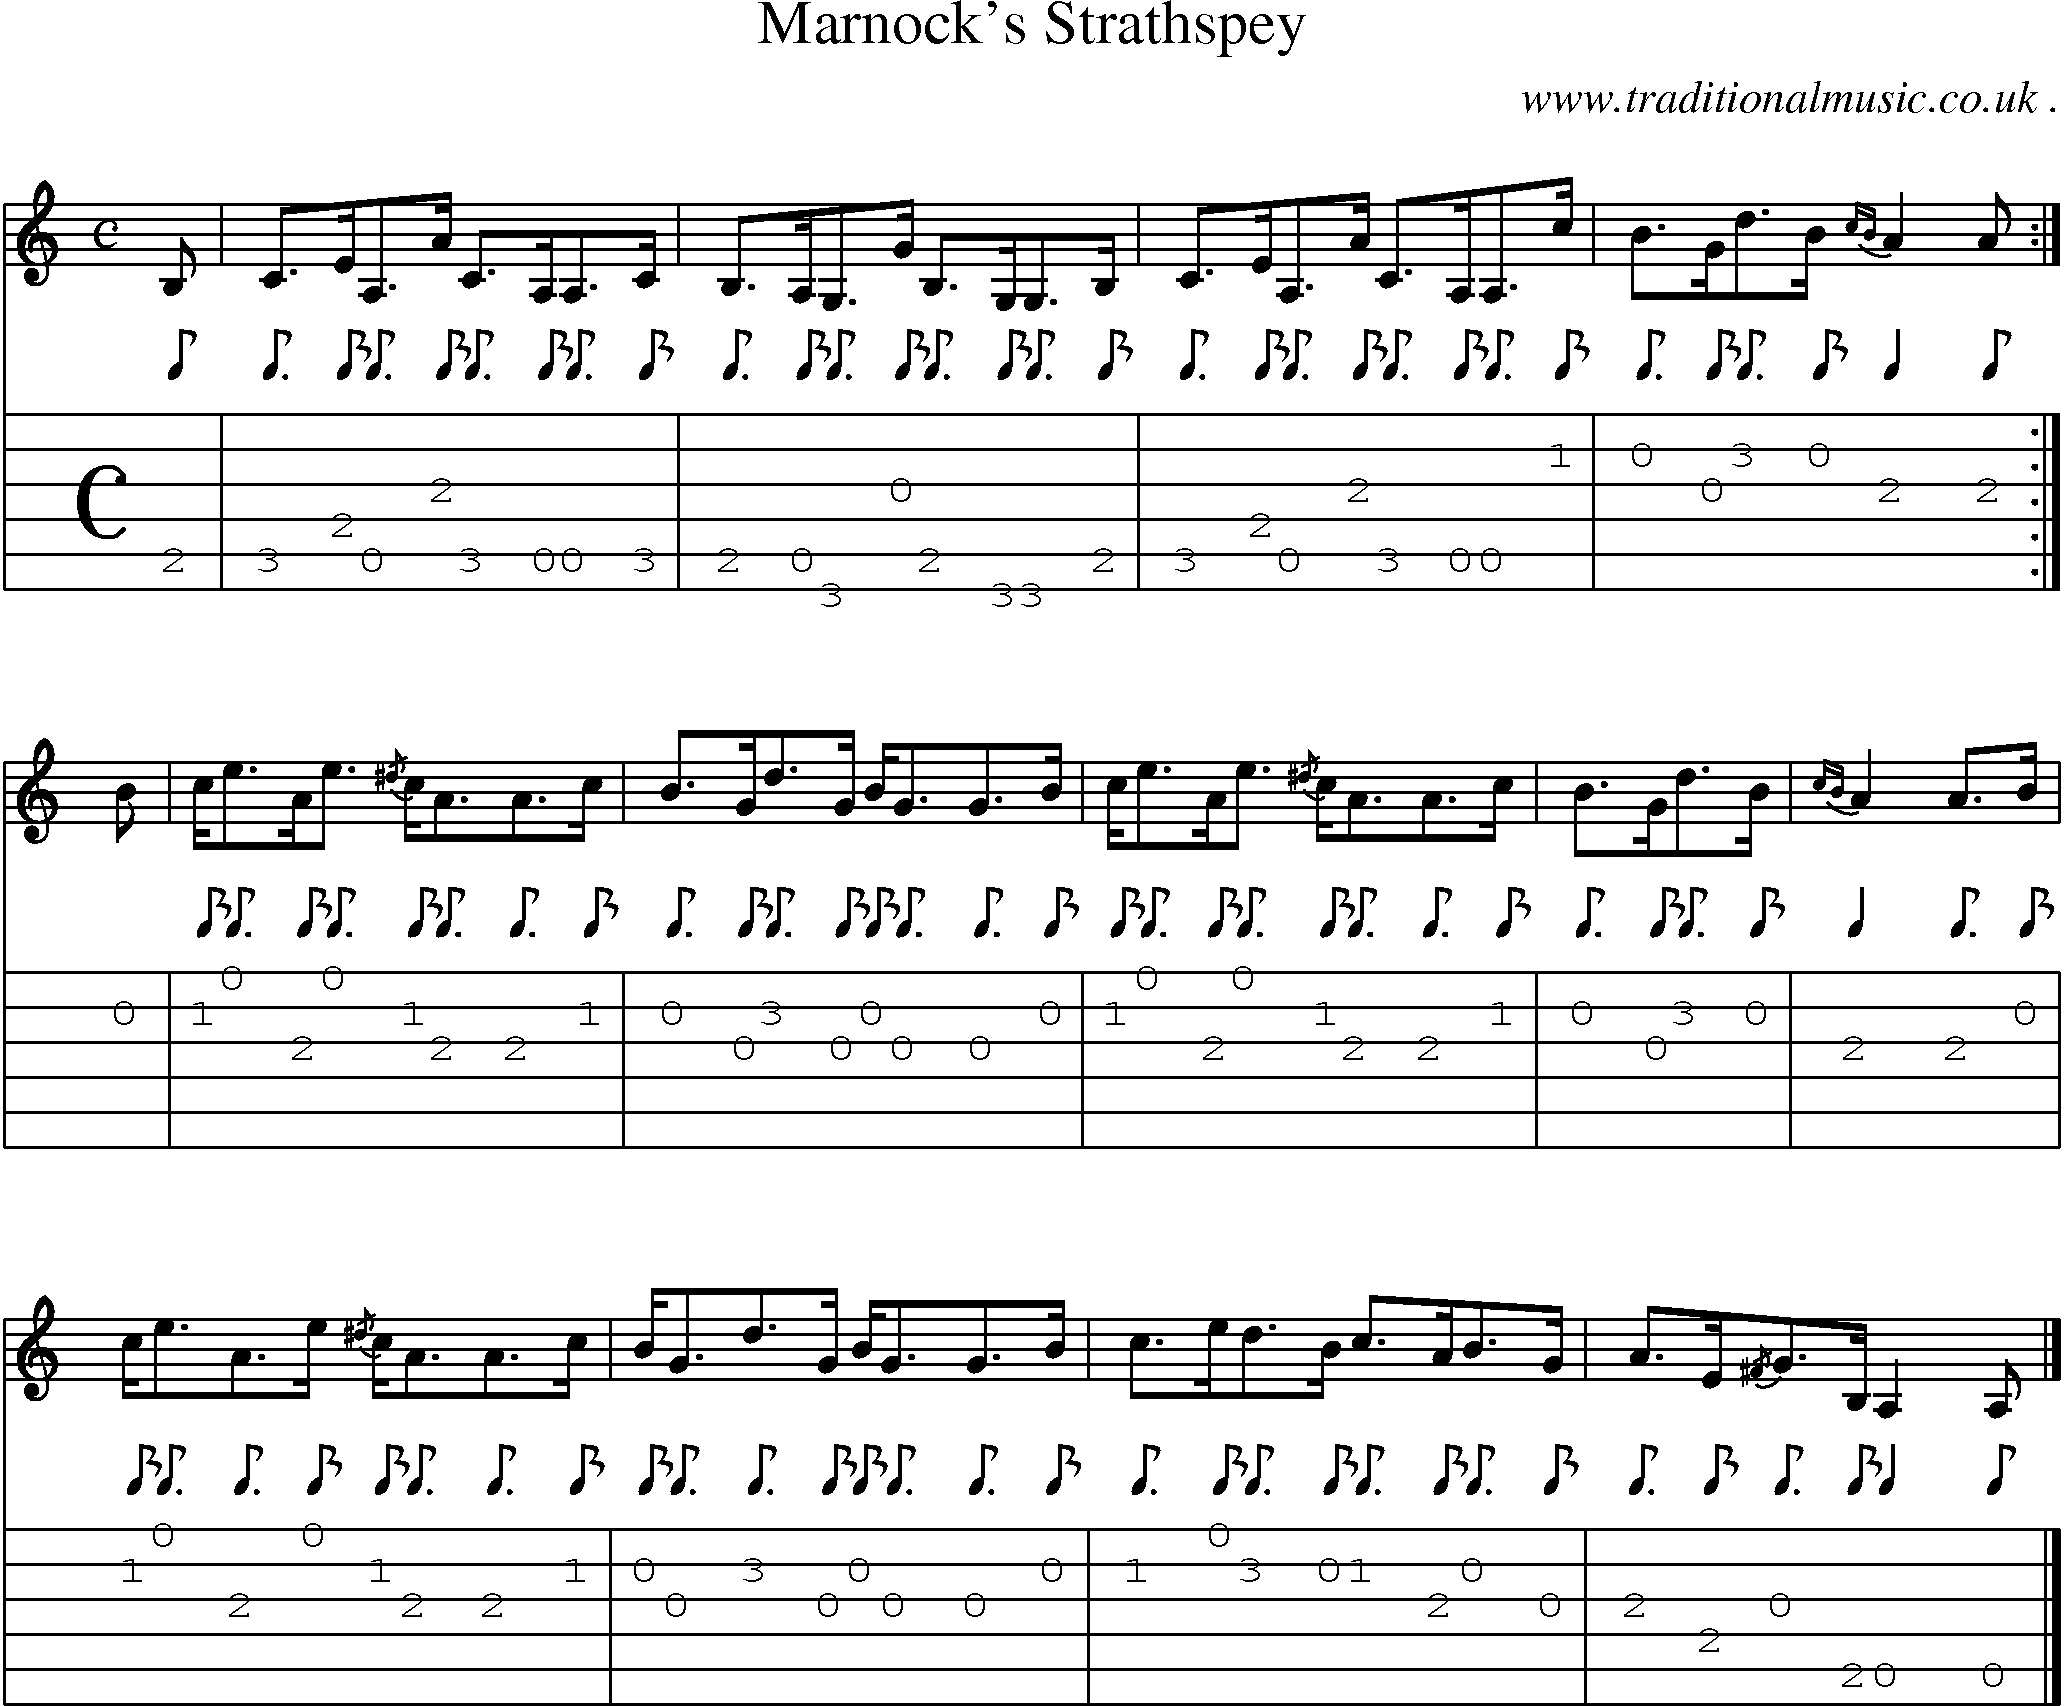 Sheet-music  score, Chords and Guitar Tabs for Marnocks Strathspey